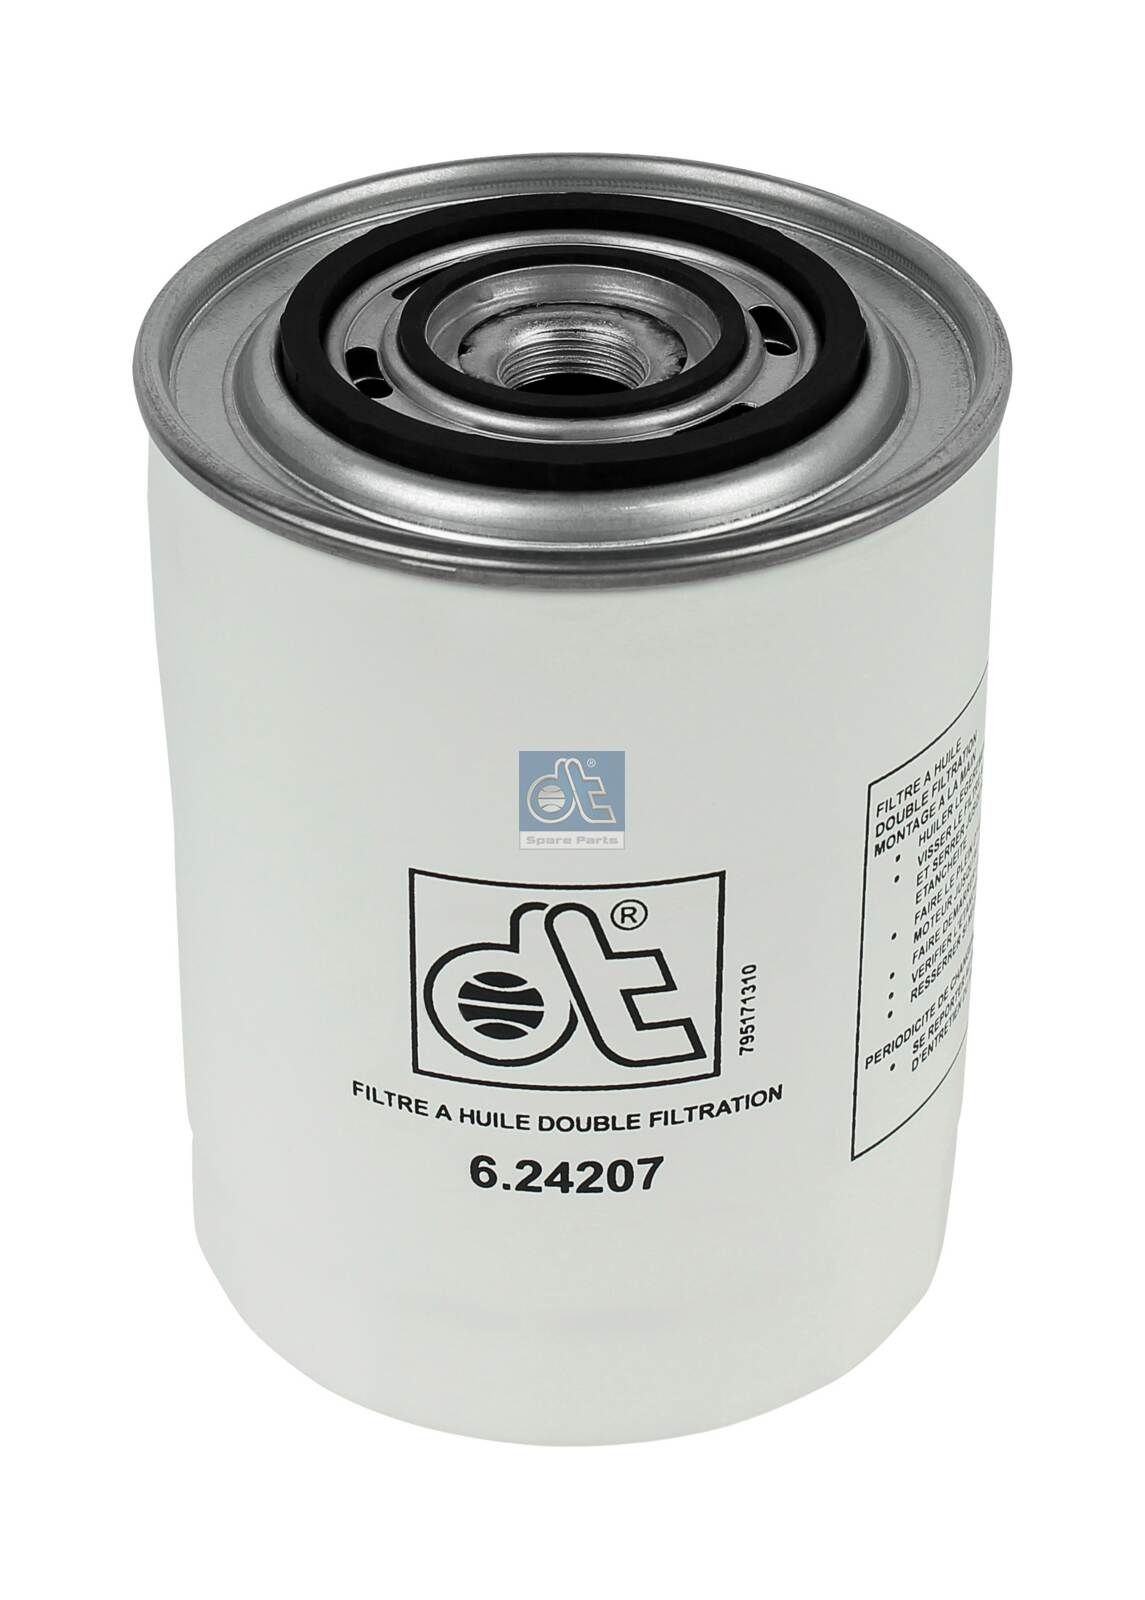 WP 1144 DT Spare Parts 6.24207 Oil filter 9843 2651